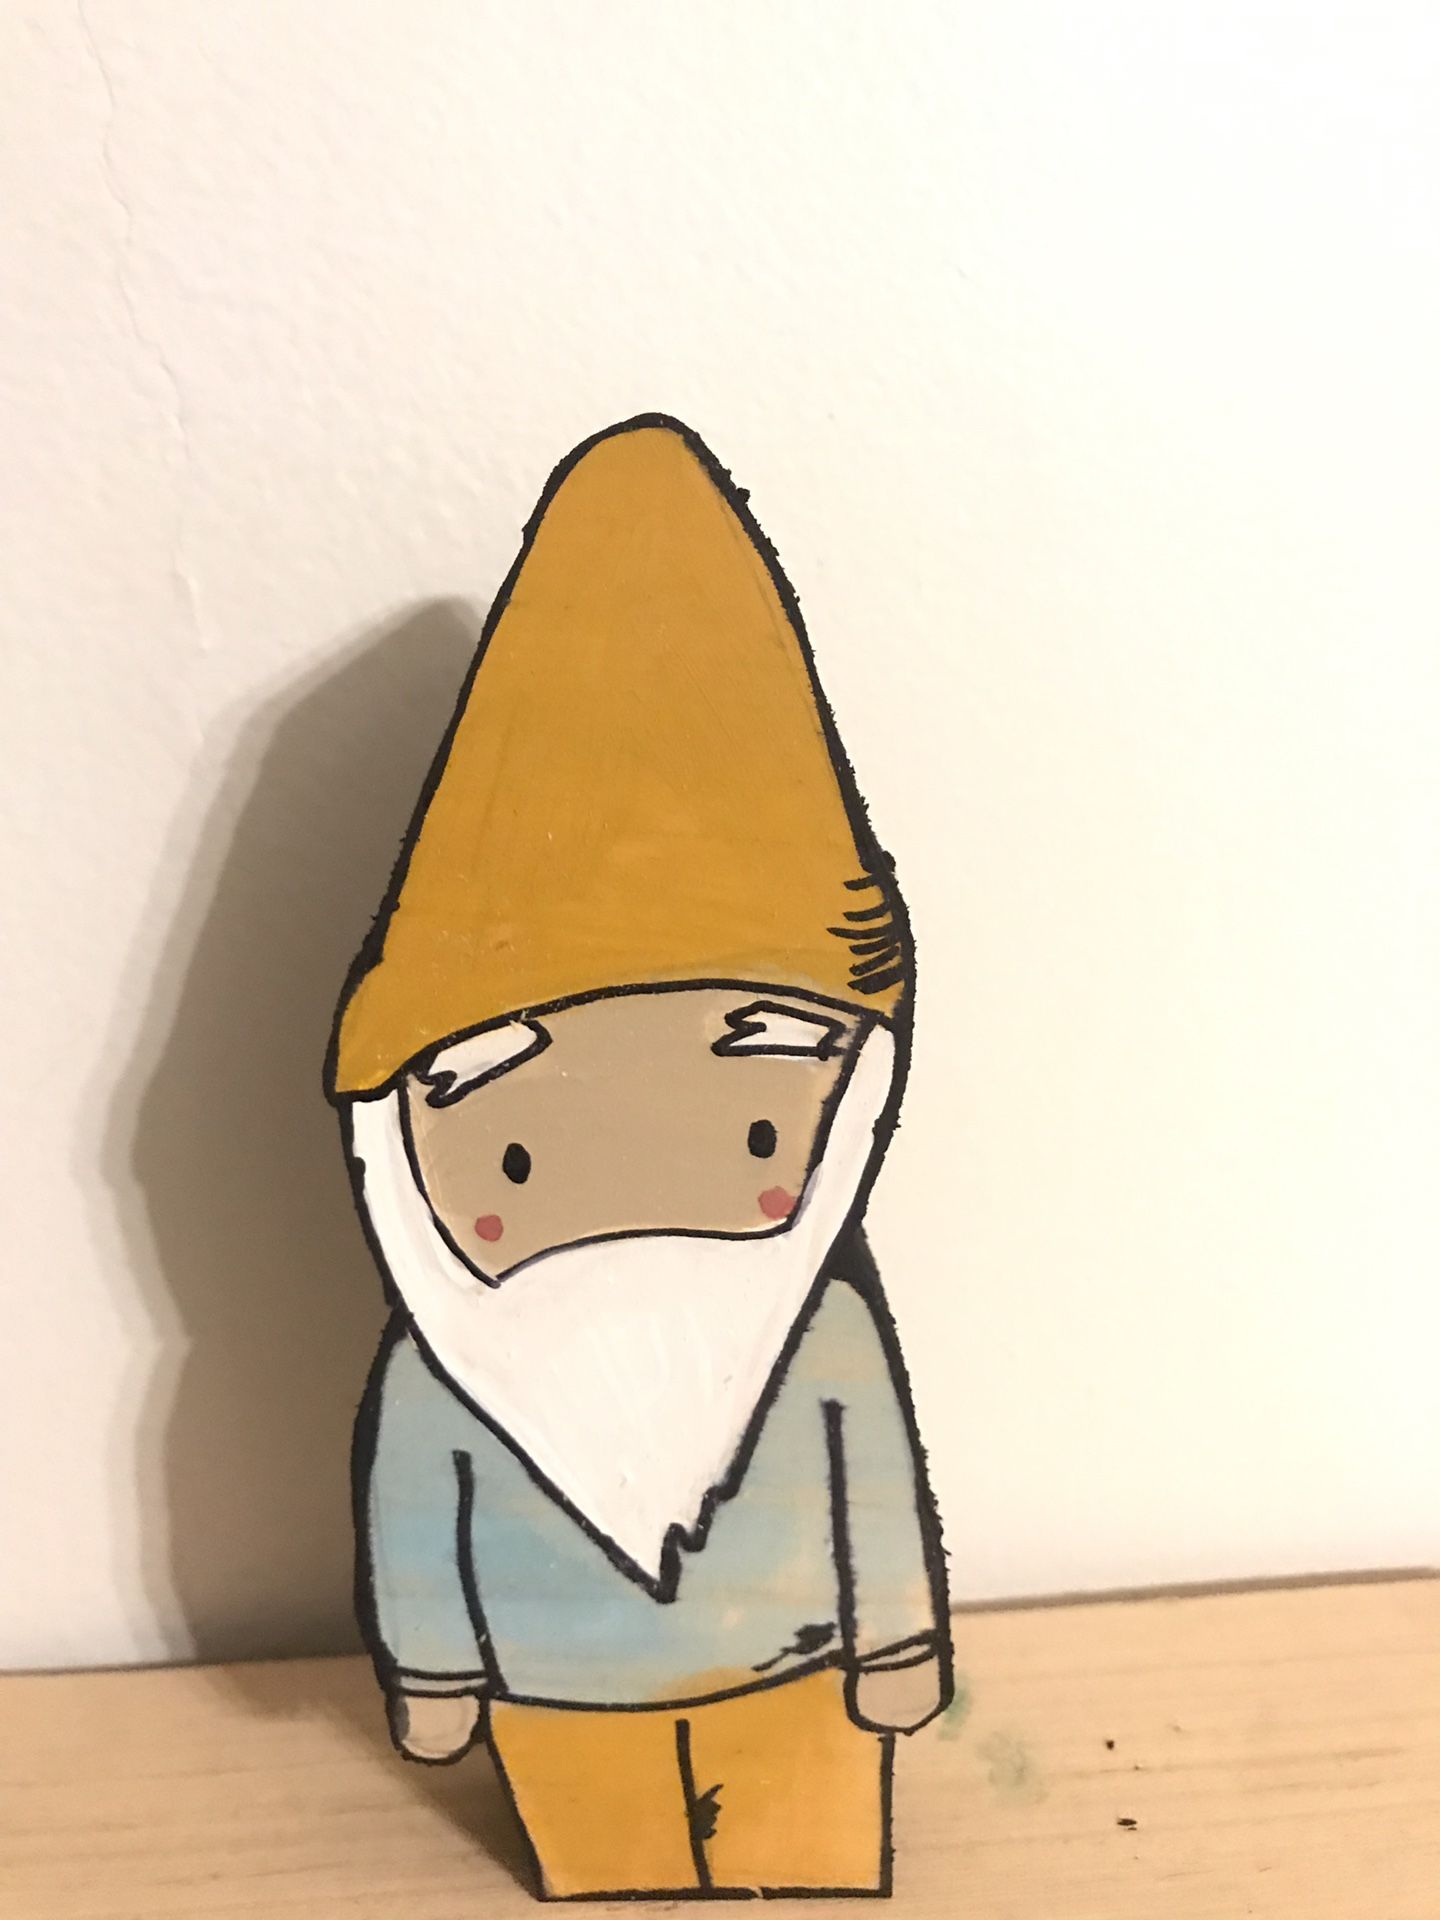 Peter the house gnome